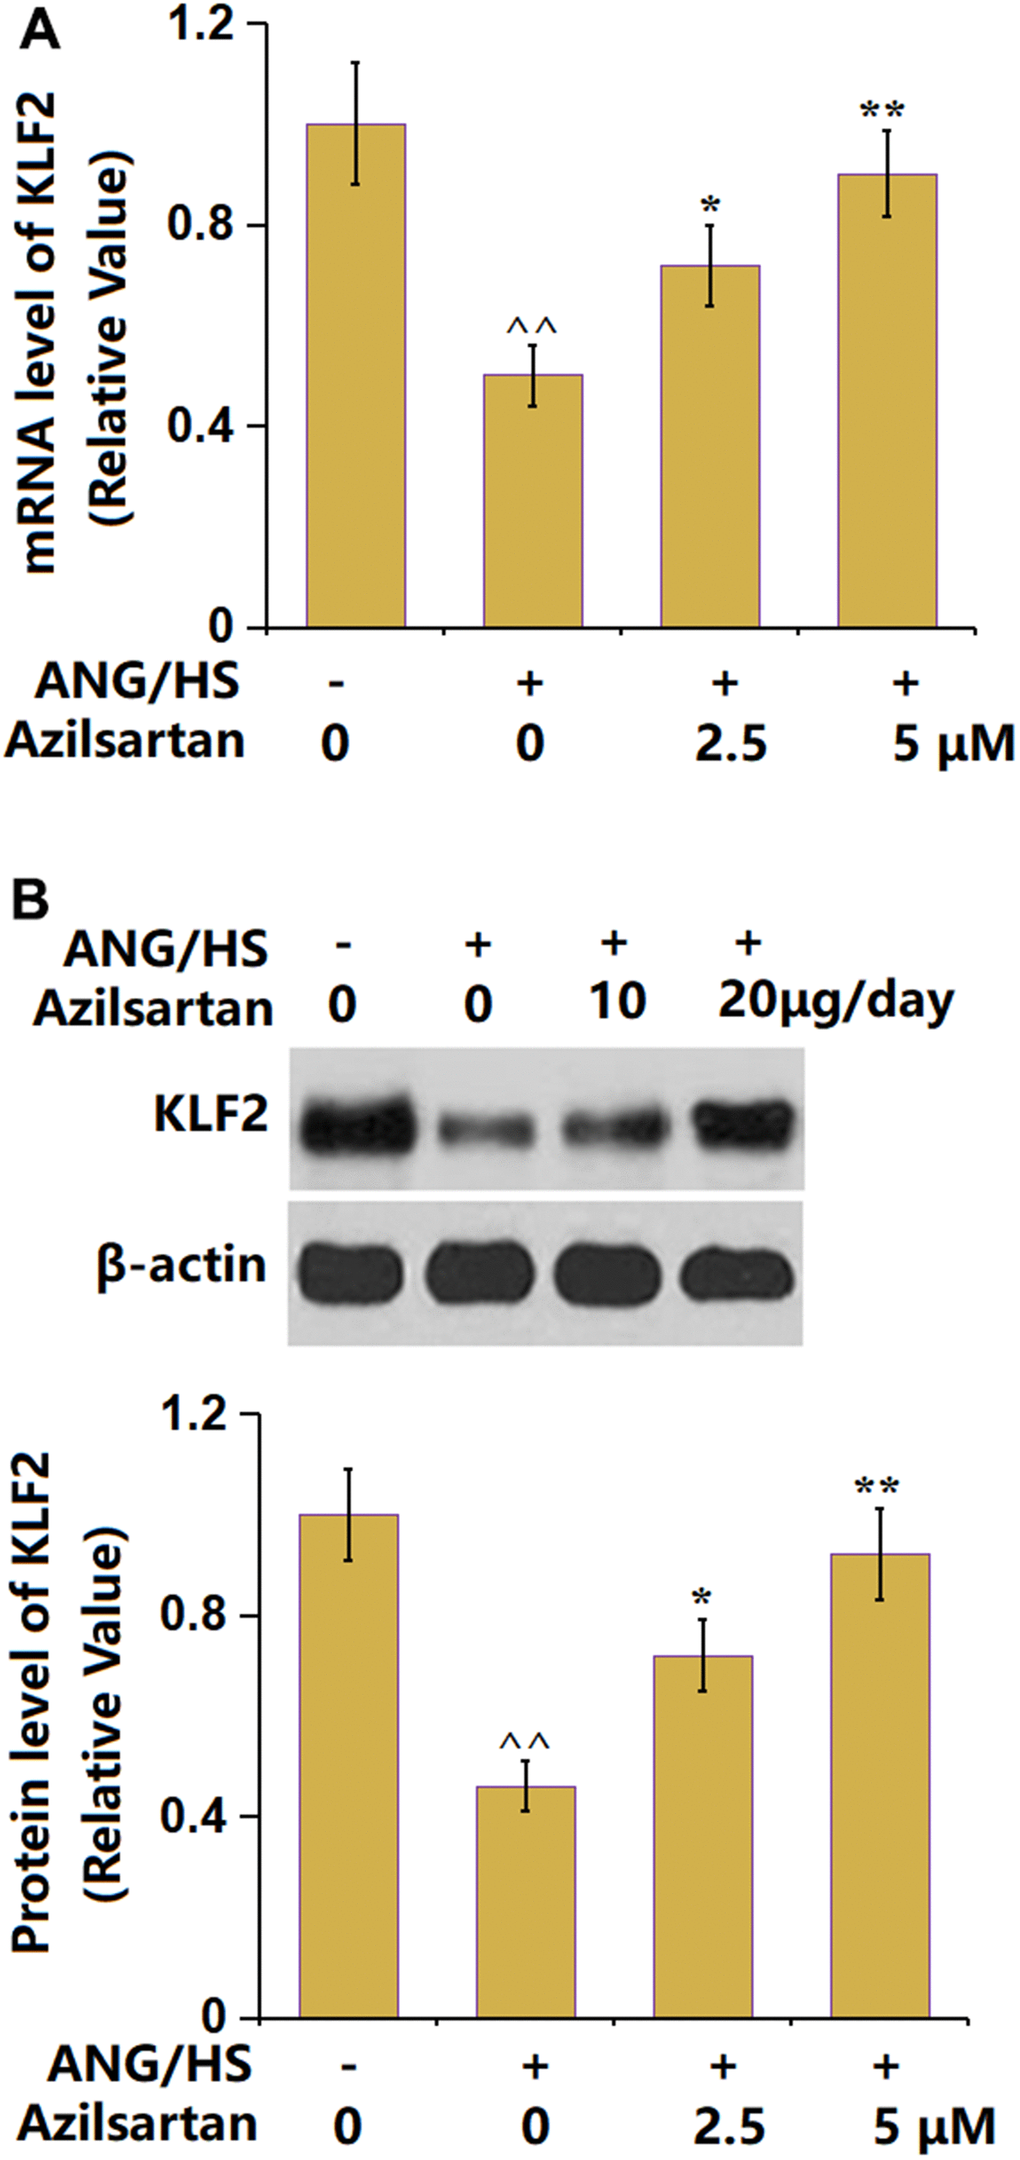 Azilsartan prevents ANG/HS-induced reduction in KLF2 in human renal glomerular endothelial cells (HrGECs). HrGEC monolayer was treated with ANG/HS with or without Azilsartan (2.5, 5 μM) for 24 hours. (A) mRNA level of KLF2; (B) Protein level of KLF2 (n=6, ^^, P